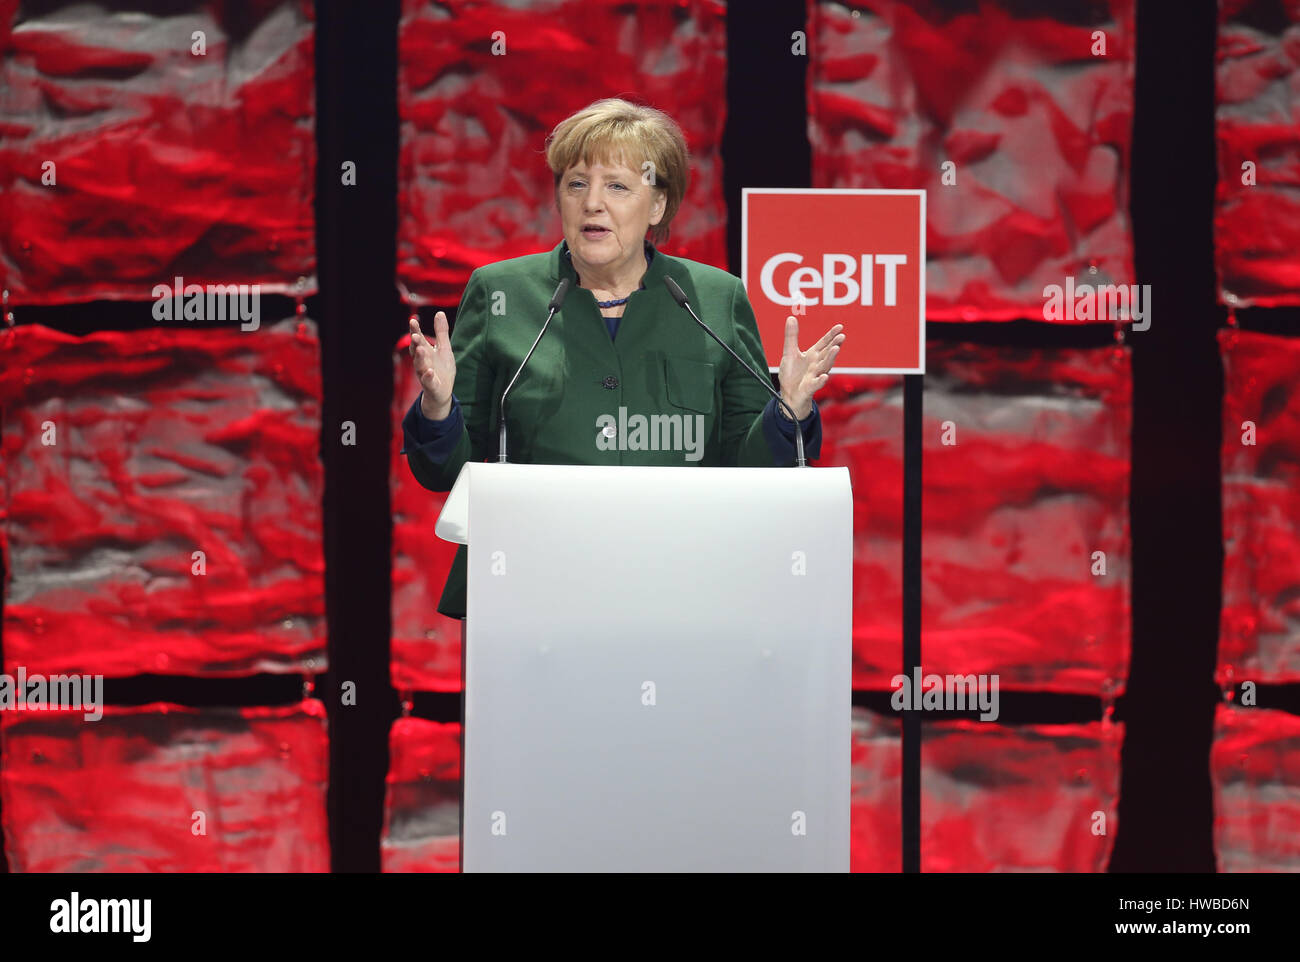 Hanover, Germany. 19th Mar, 2017. German Chancellor Angela Merkel (CDU) speaking at the opening of the CeBIT trade fair in Hanover, Germany, 19 March 2017. Japan is the partner country of the 2017 CeBIT. Photo: Friso Gentsch/dpa/Alamy Live News Stock Photo